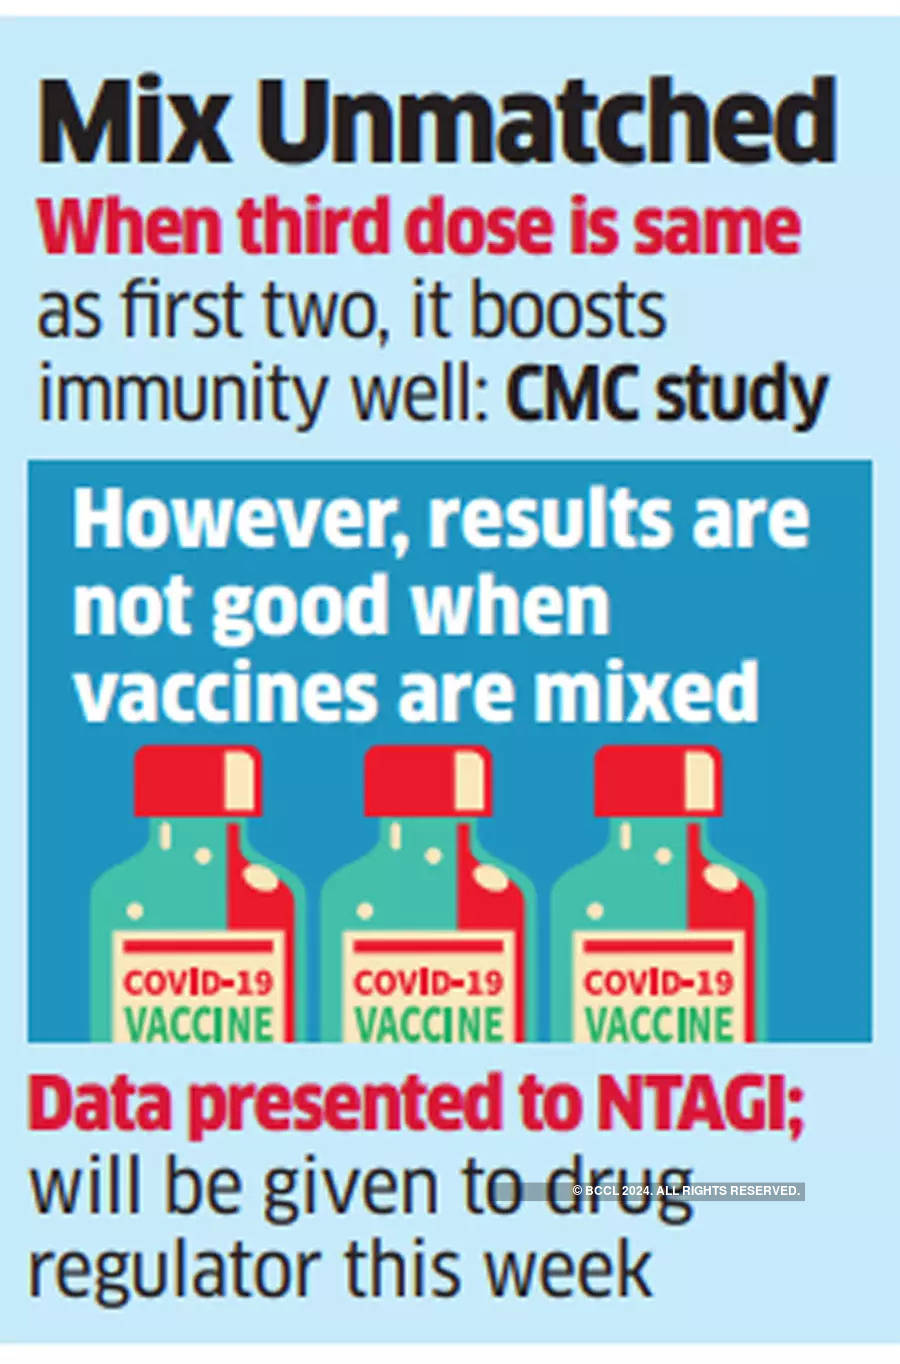 Govt unlikely to allow different vaccine as Covid booster